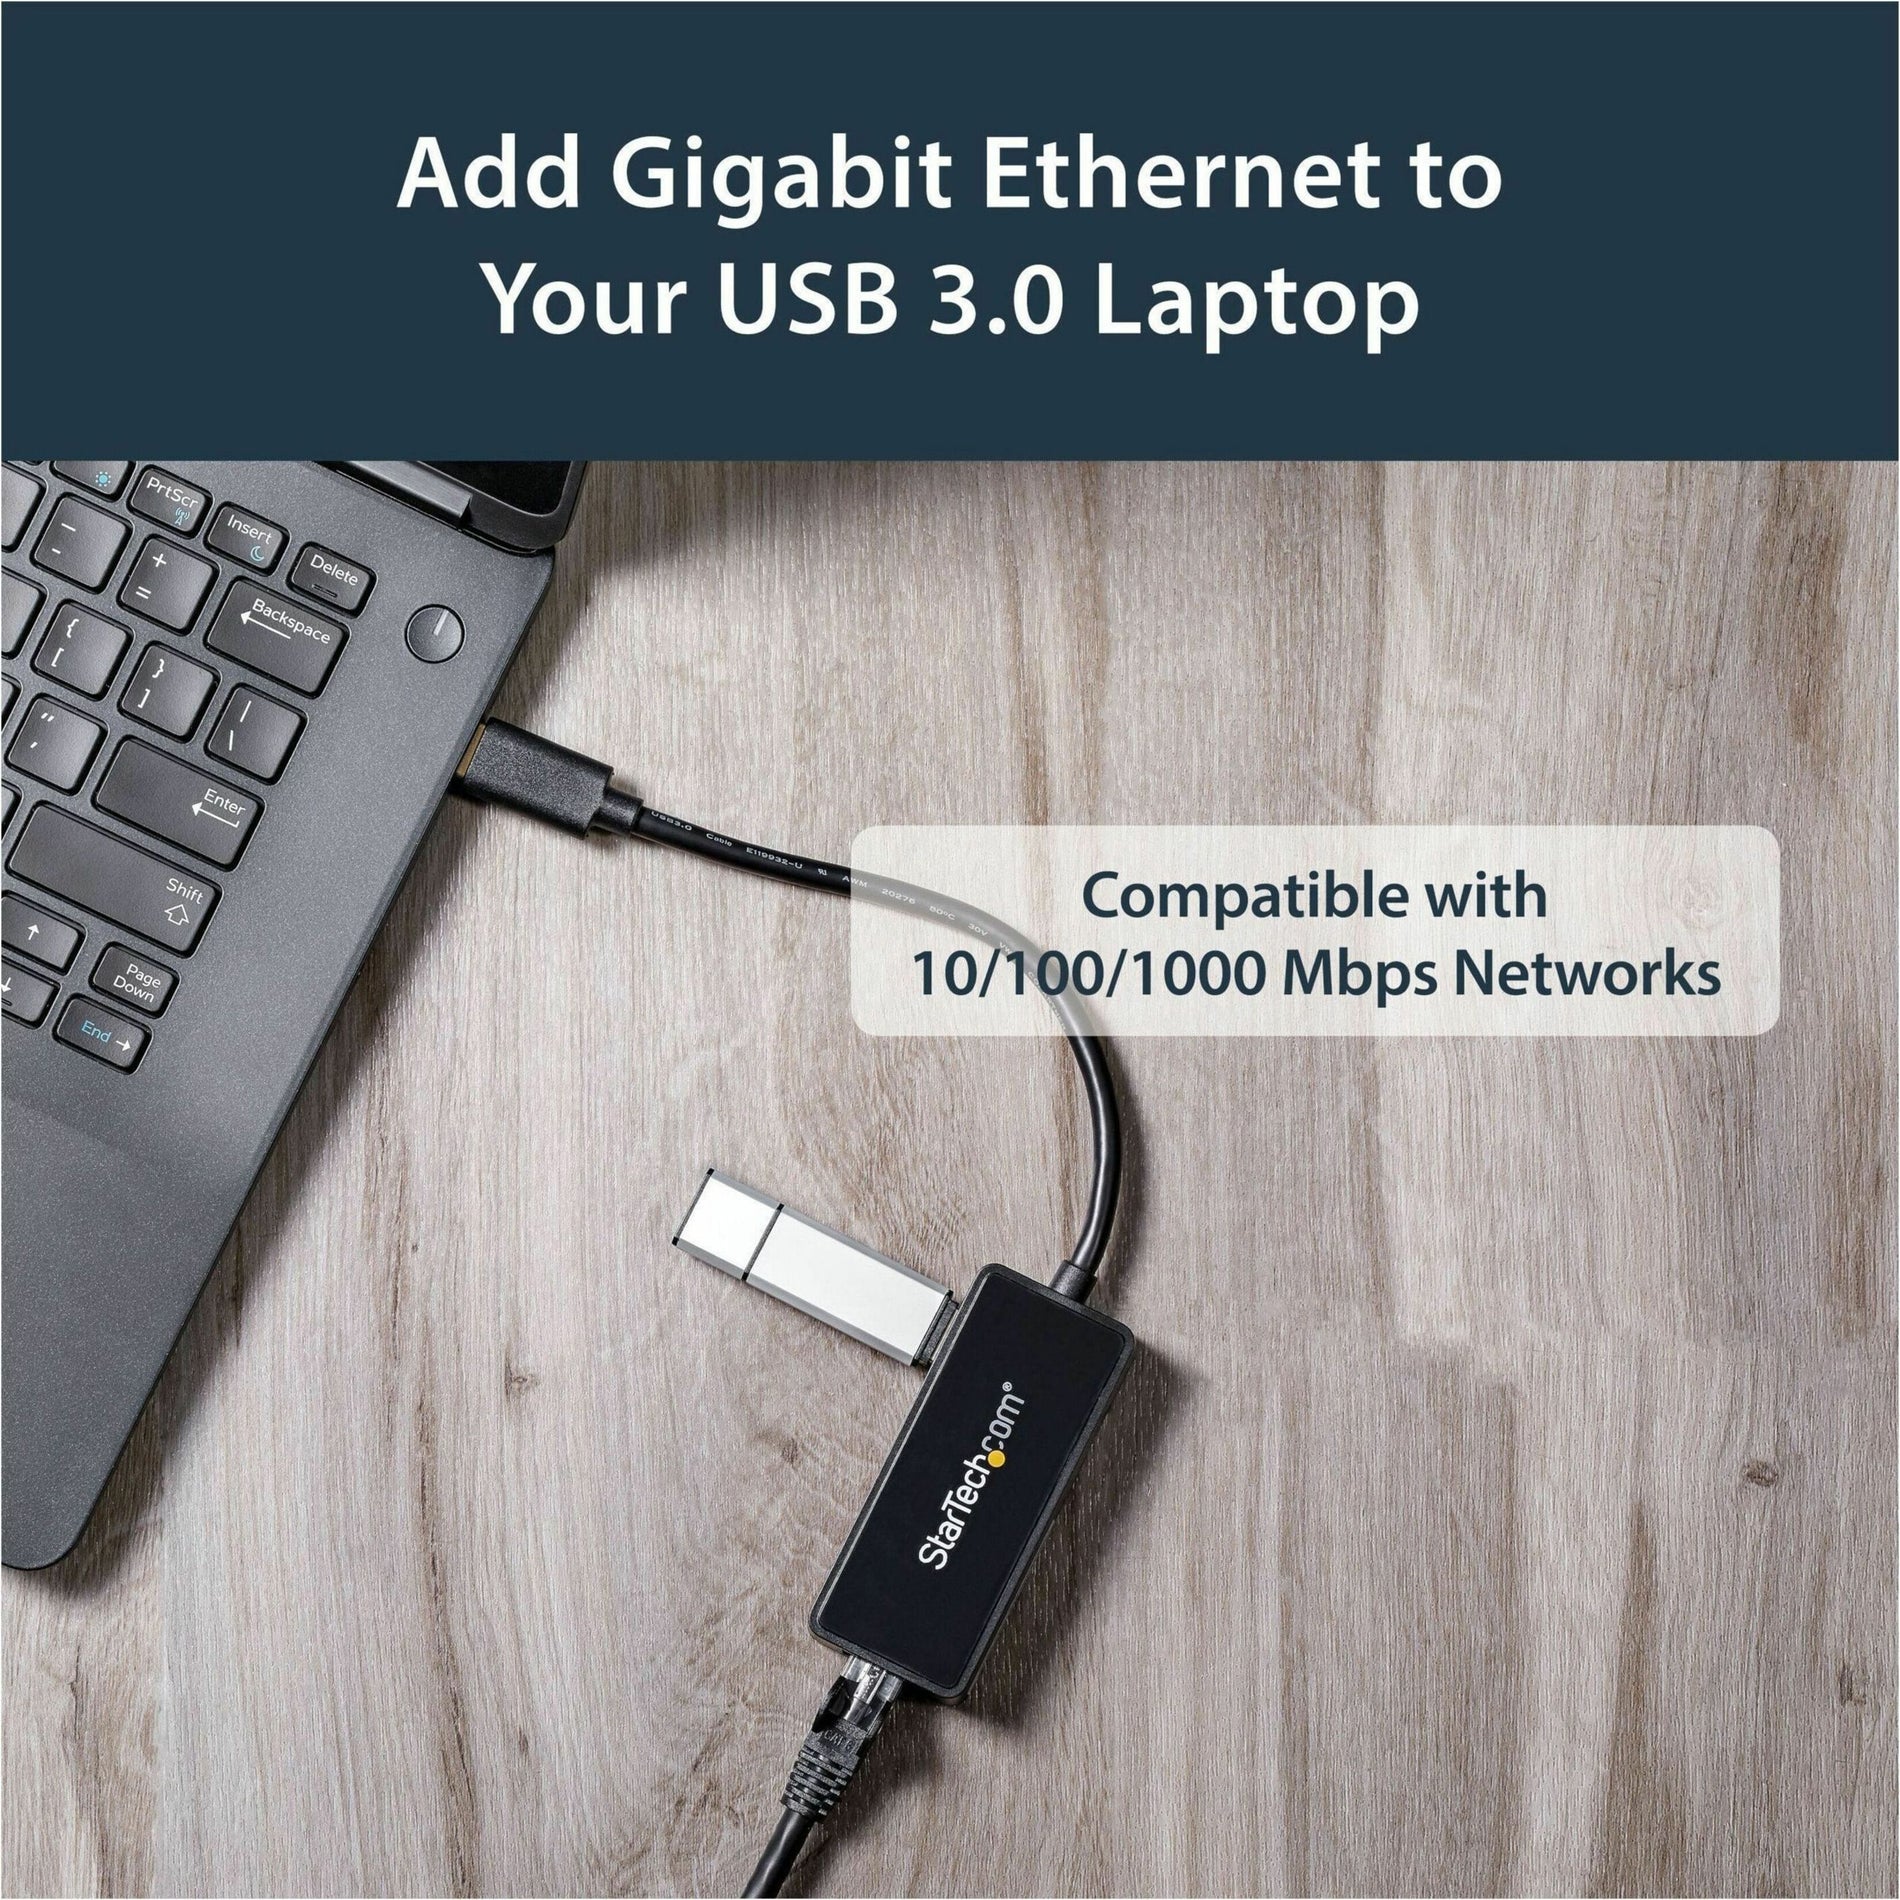 StarTech.com USB31000SPTB USB 3.0 to Gigabit Ethernet Adapter NIC w/ USB Port - Black, High-Speed Internet Connection for Your PC